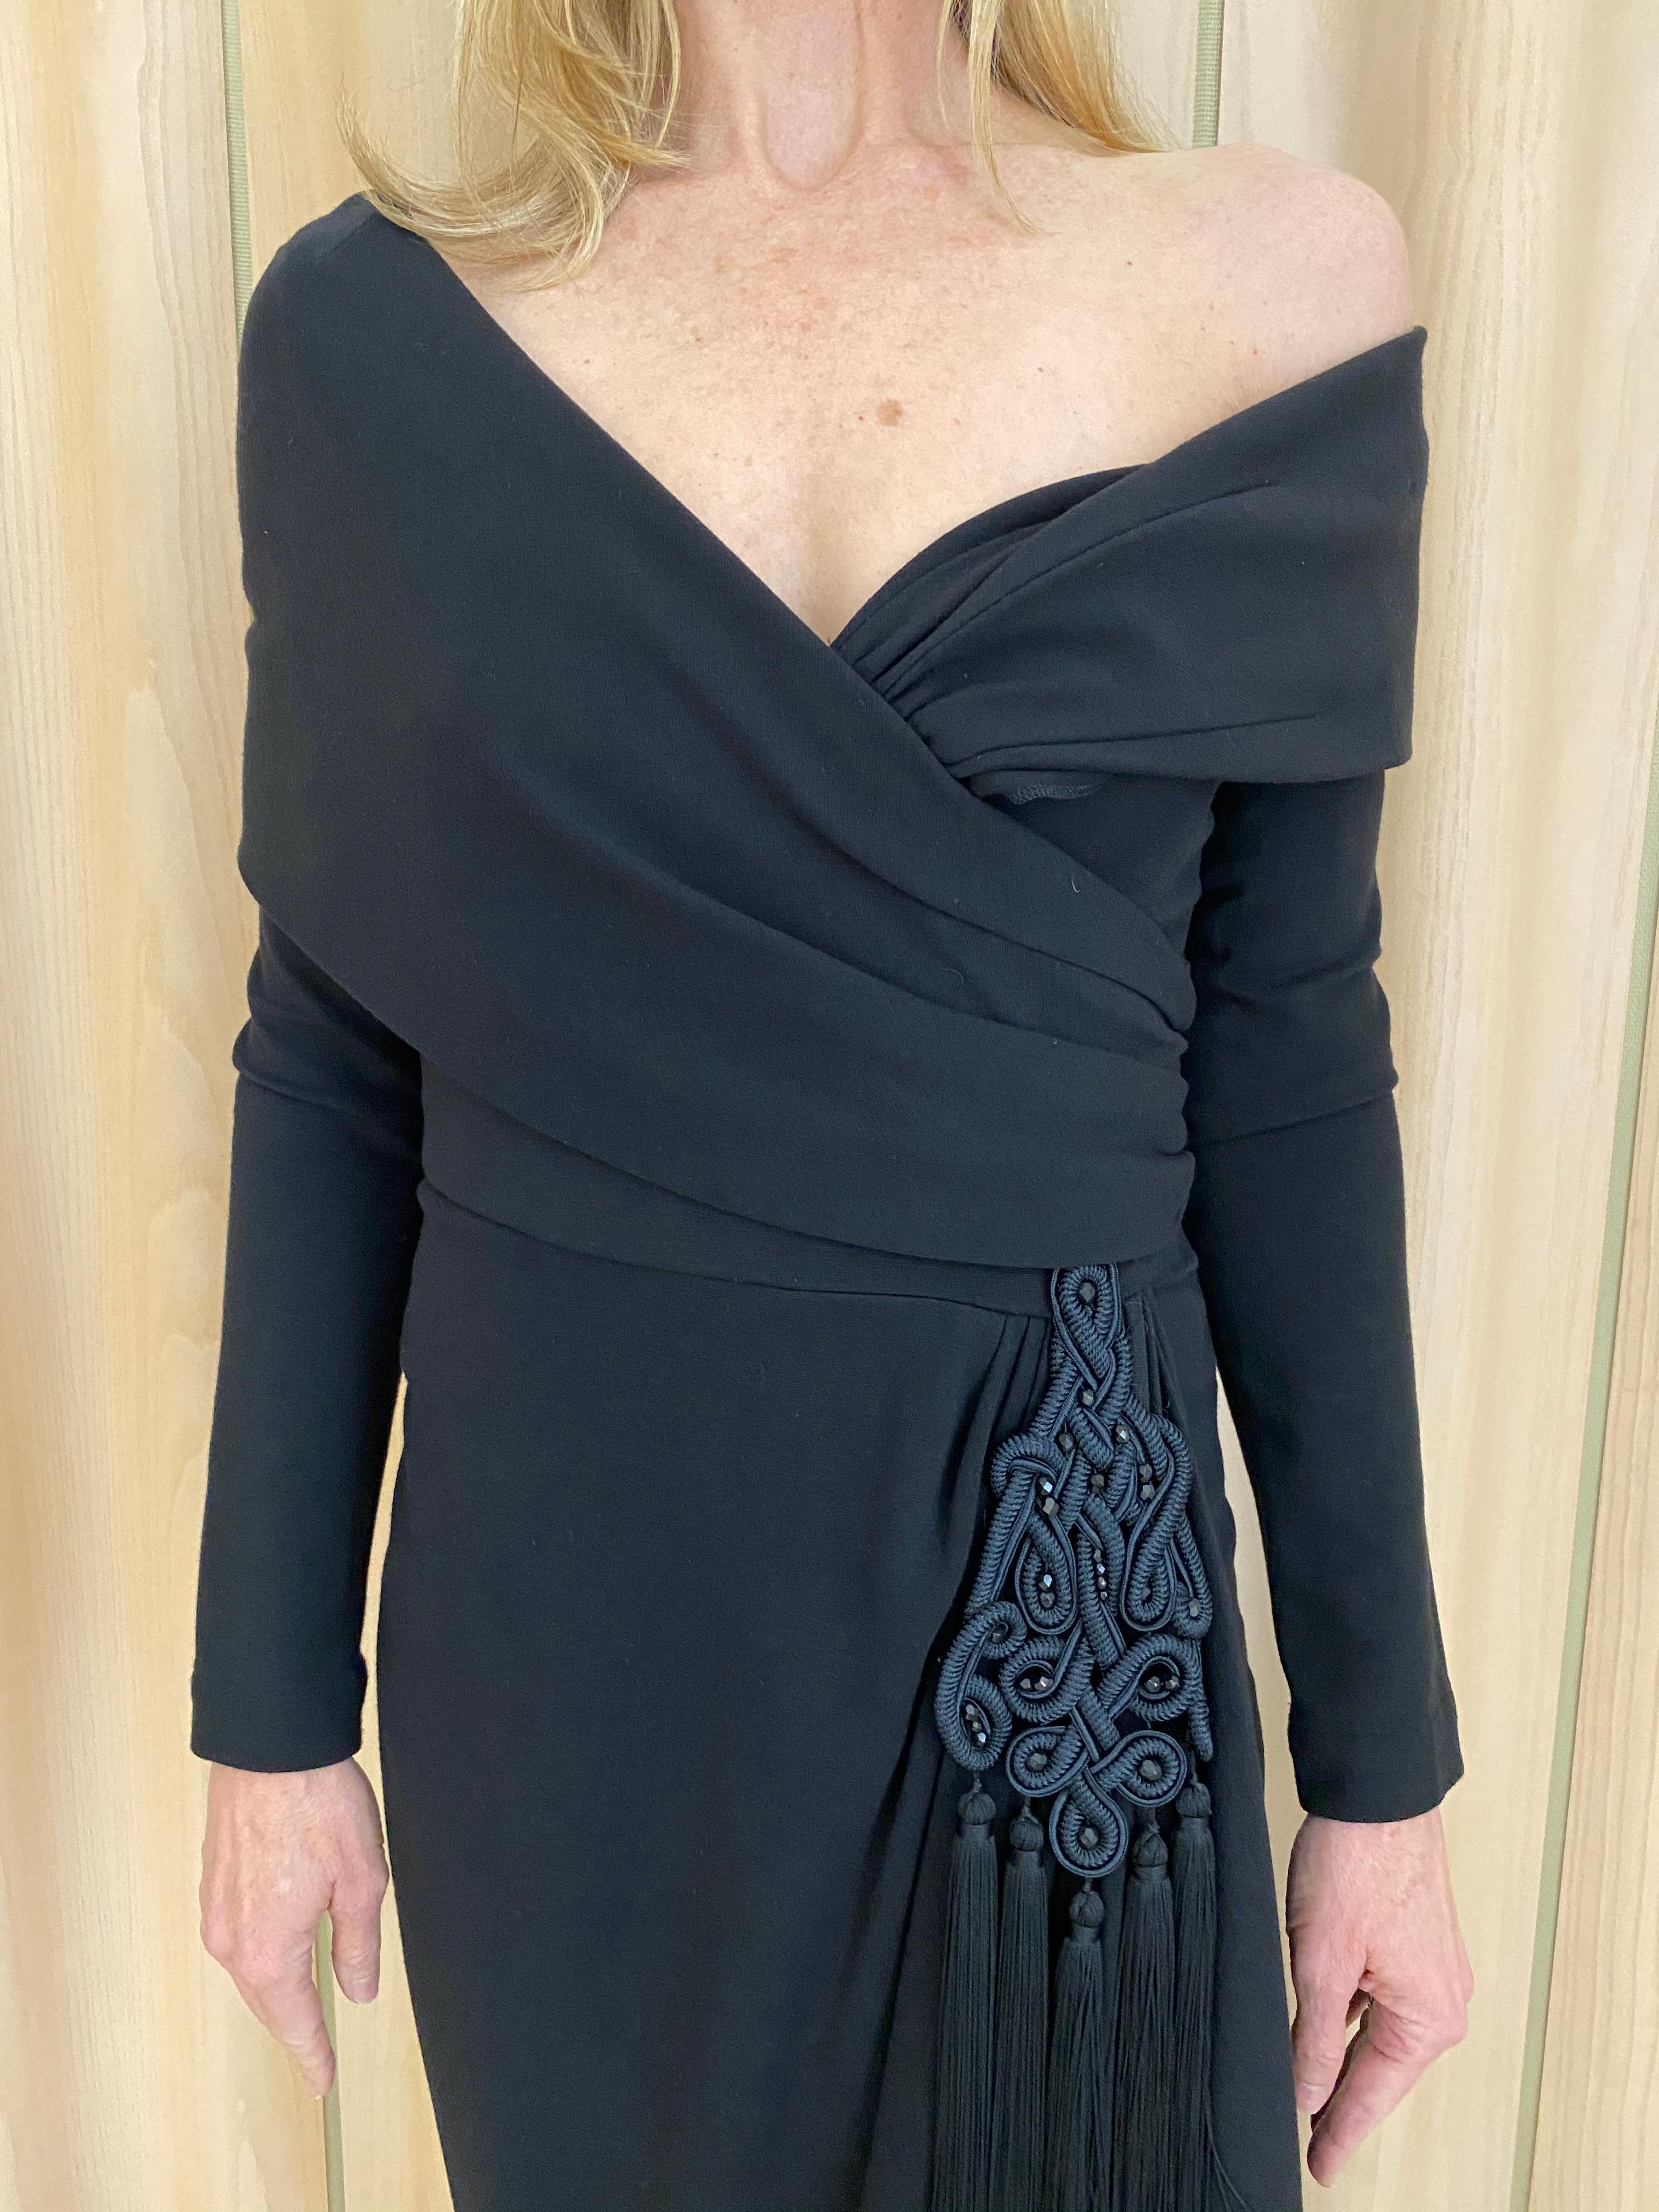 Elegant 1990s Isabelle Allard Black Knit Jersey Off Shoulder Long Sleeve Gown with tassel.
Fabric has some stretch. Perfect gown for wedding or black tie event.
Bust 36” / Waist 28” / 